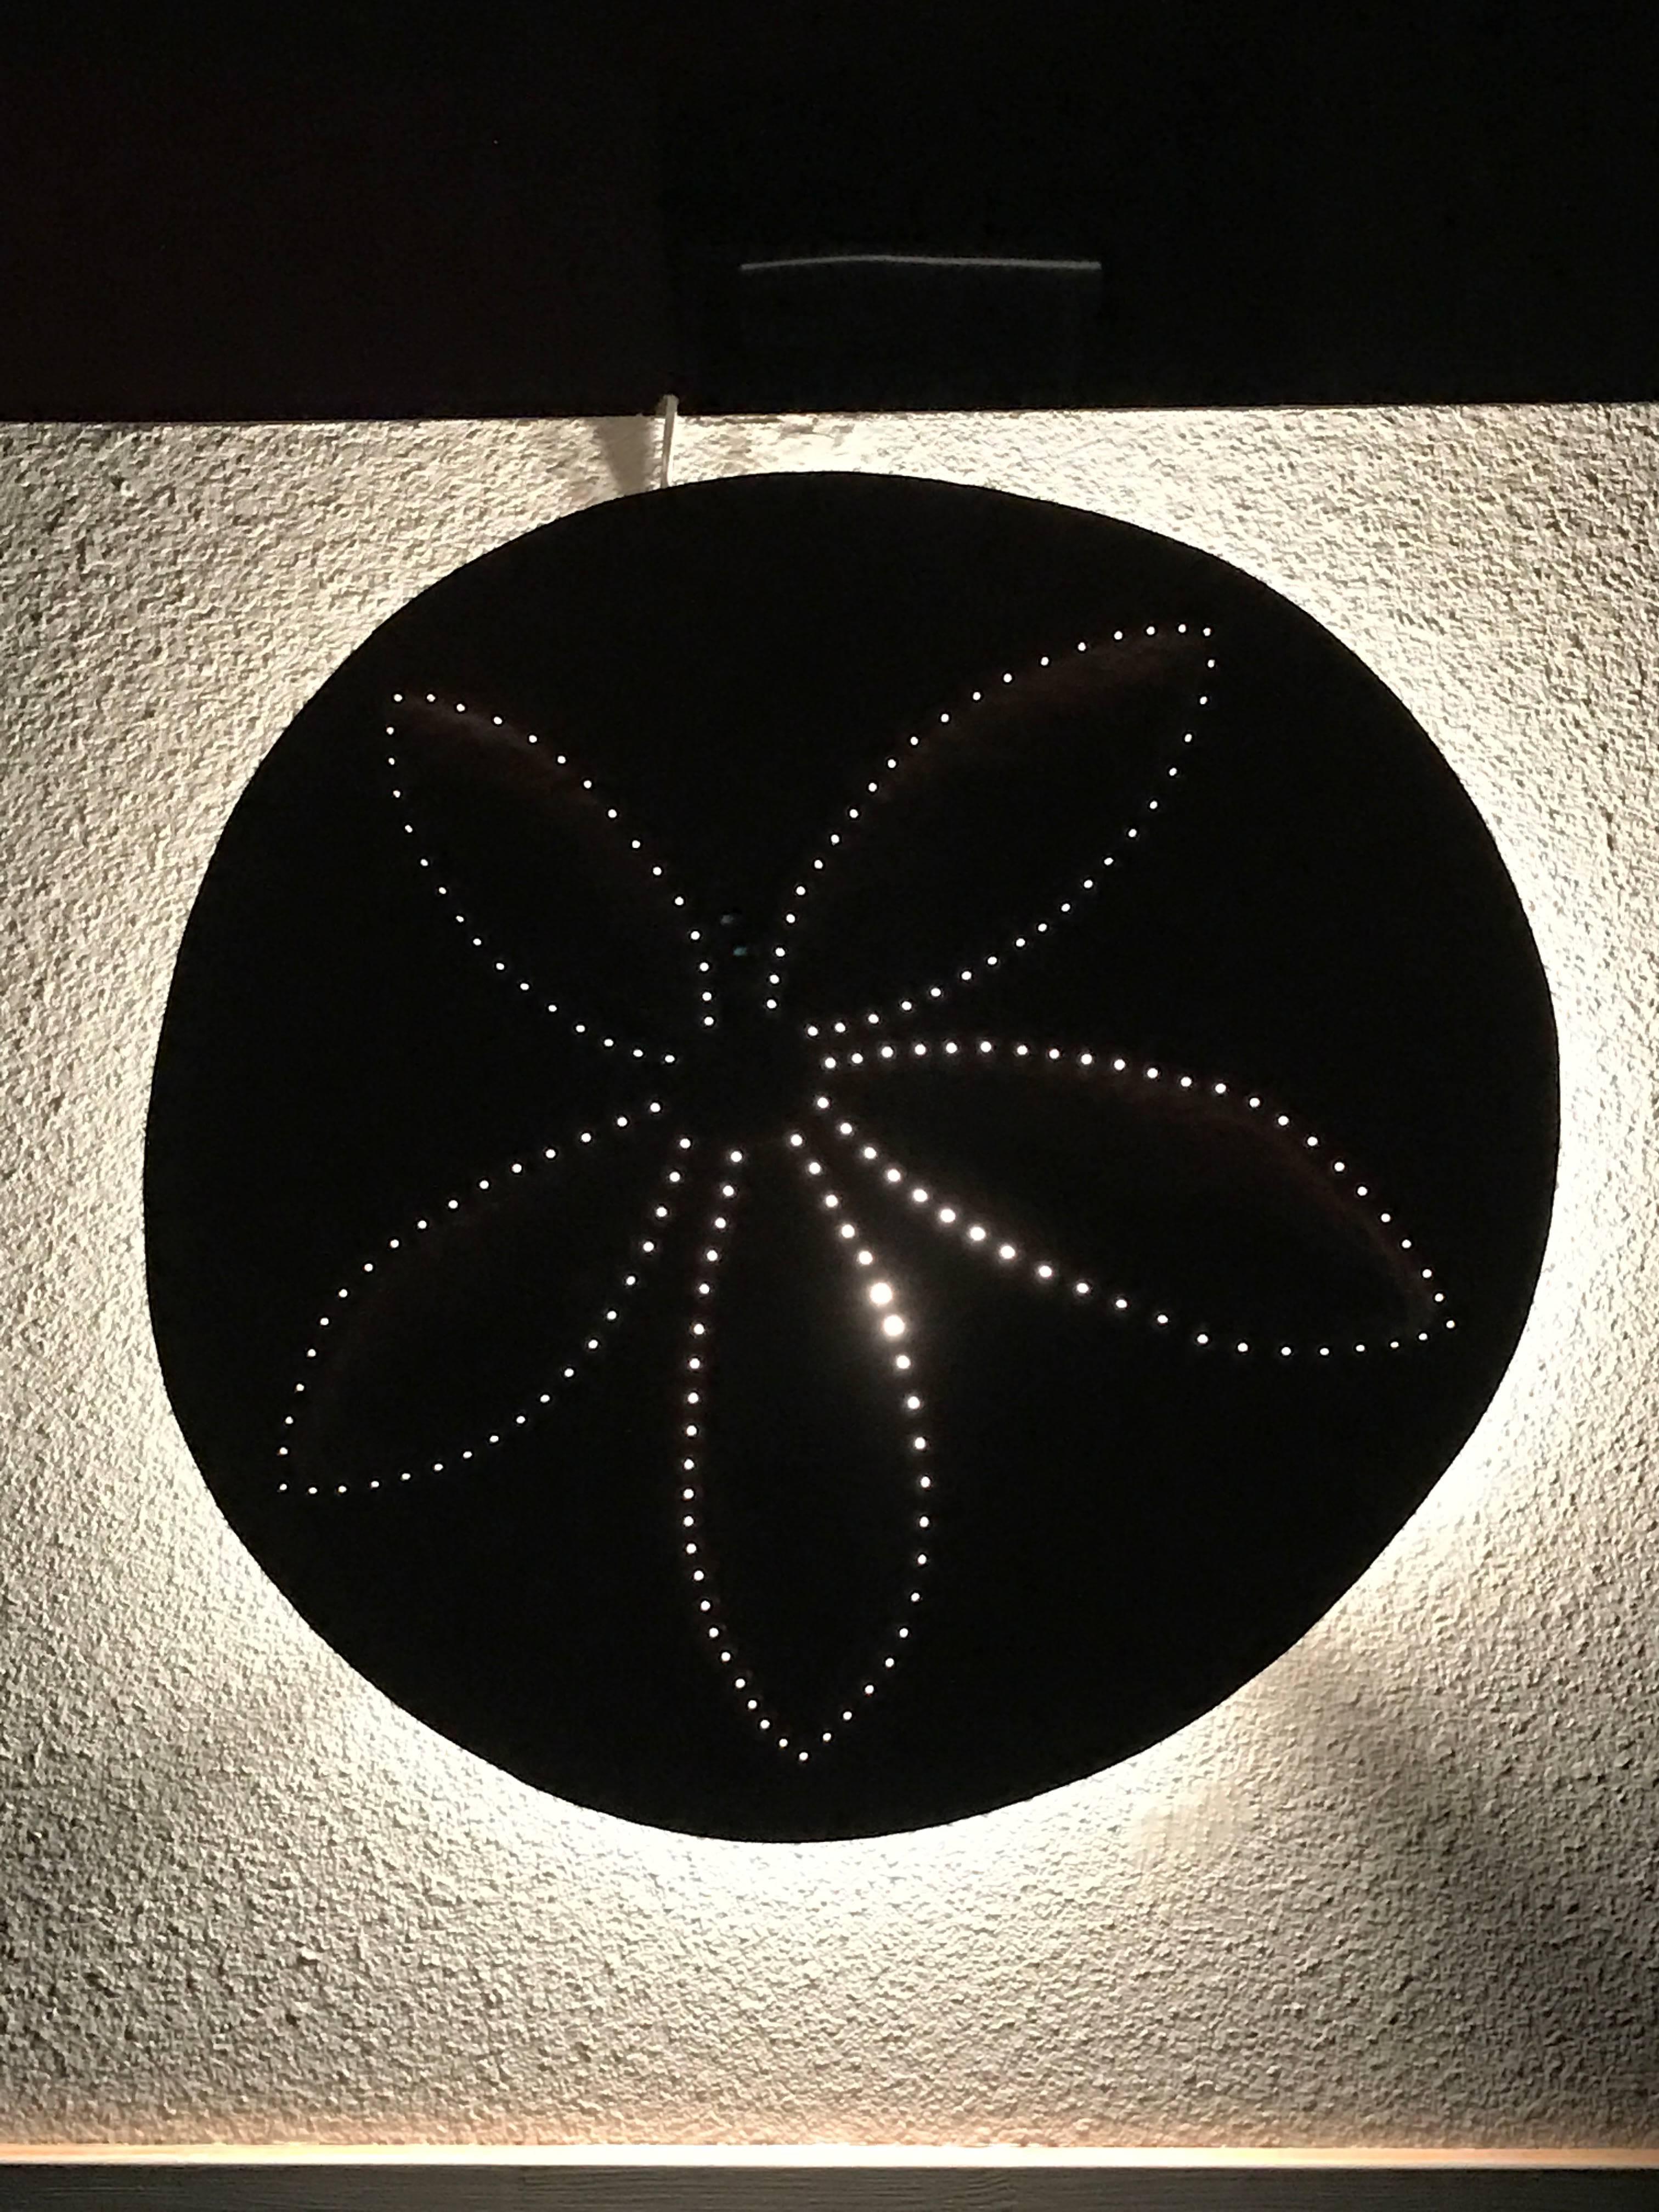 hand forged metal illuminated wall sculpture. Signed and powder coated.

Laura Walters Abrams has been making sculpture since the early 1990’s. Her success is due to her ability to not only create beautiful and meaningful art, but effortlessly